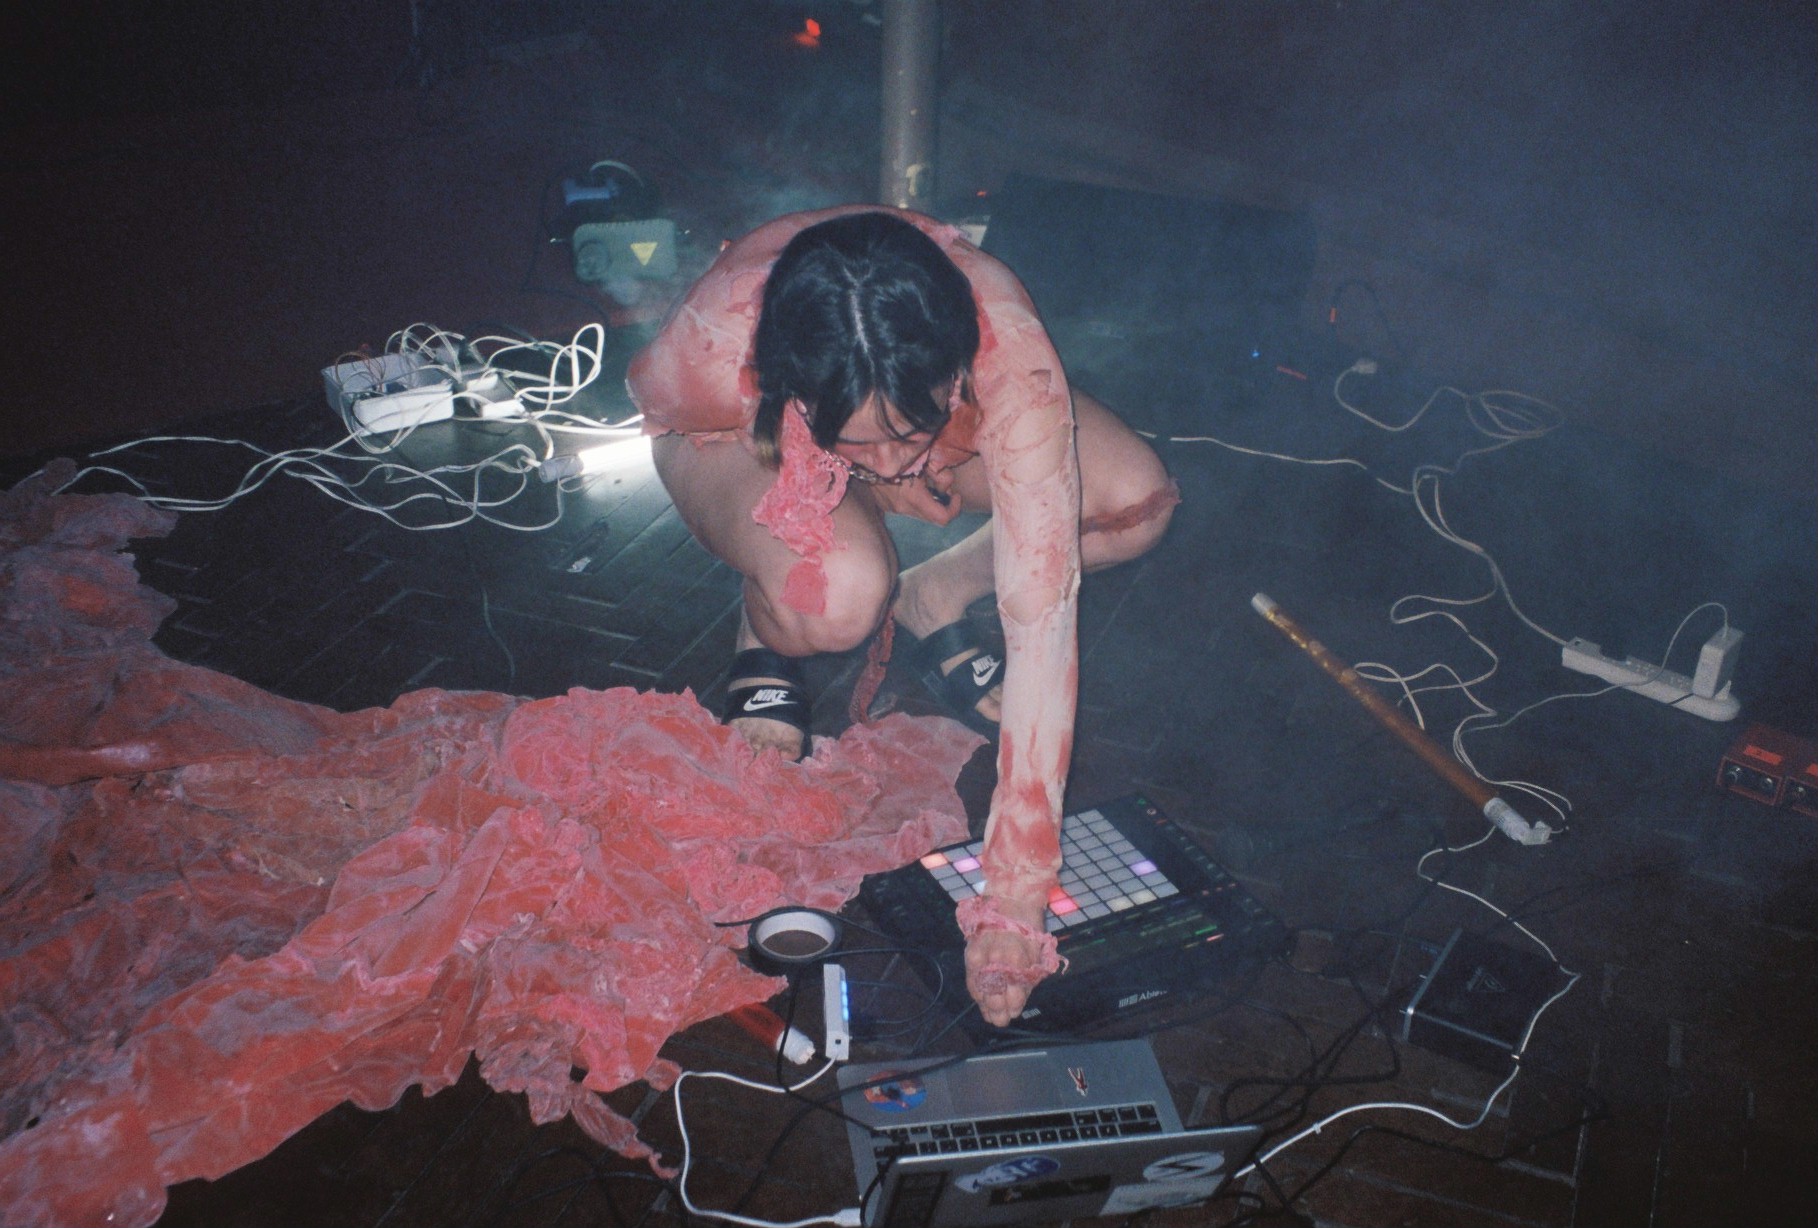 A photo of Candie performing. She is knelt on the floor making adjustments to her electronic instrument on the floor. There are swathes of pink fabric on the floor.